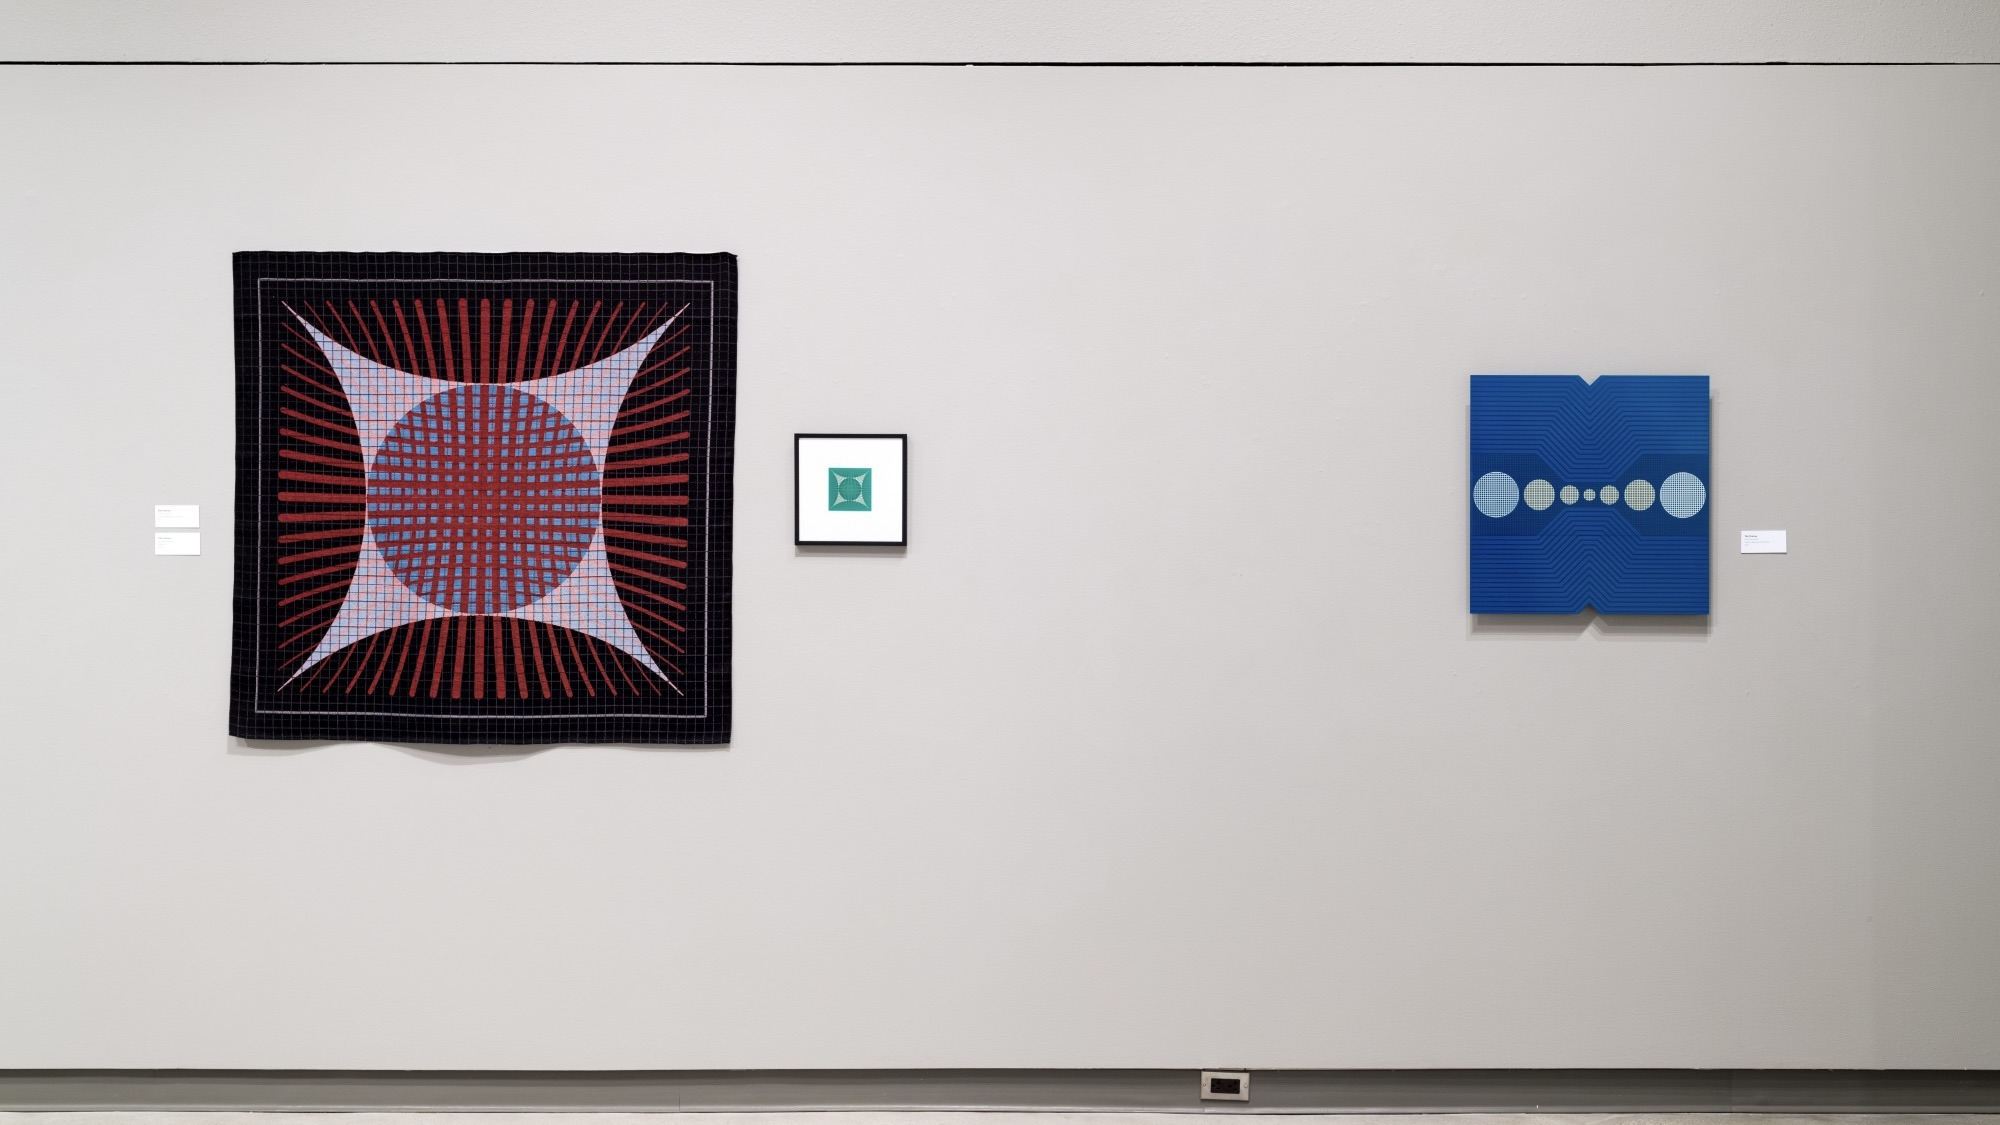 Photo of the Electronic Drift exhibition at the Waldemar A. Schmidt Art Gallery